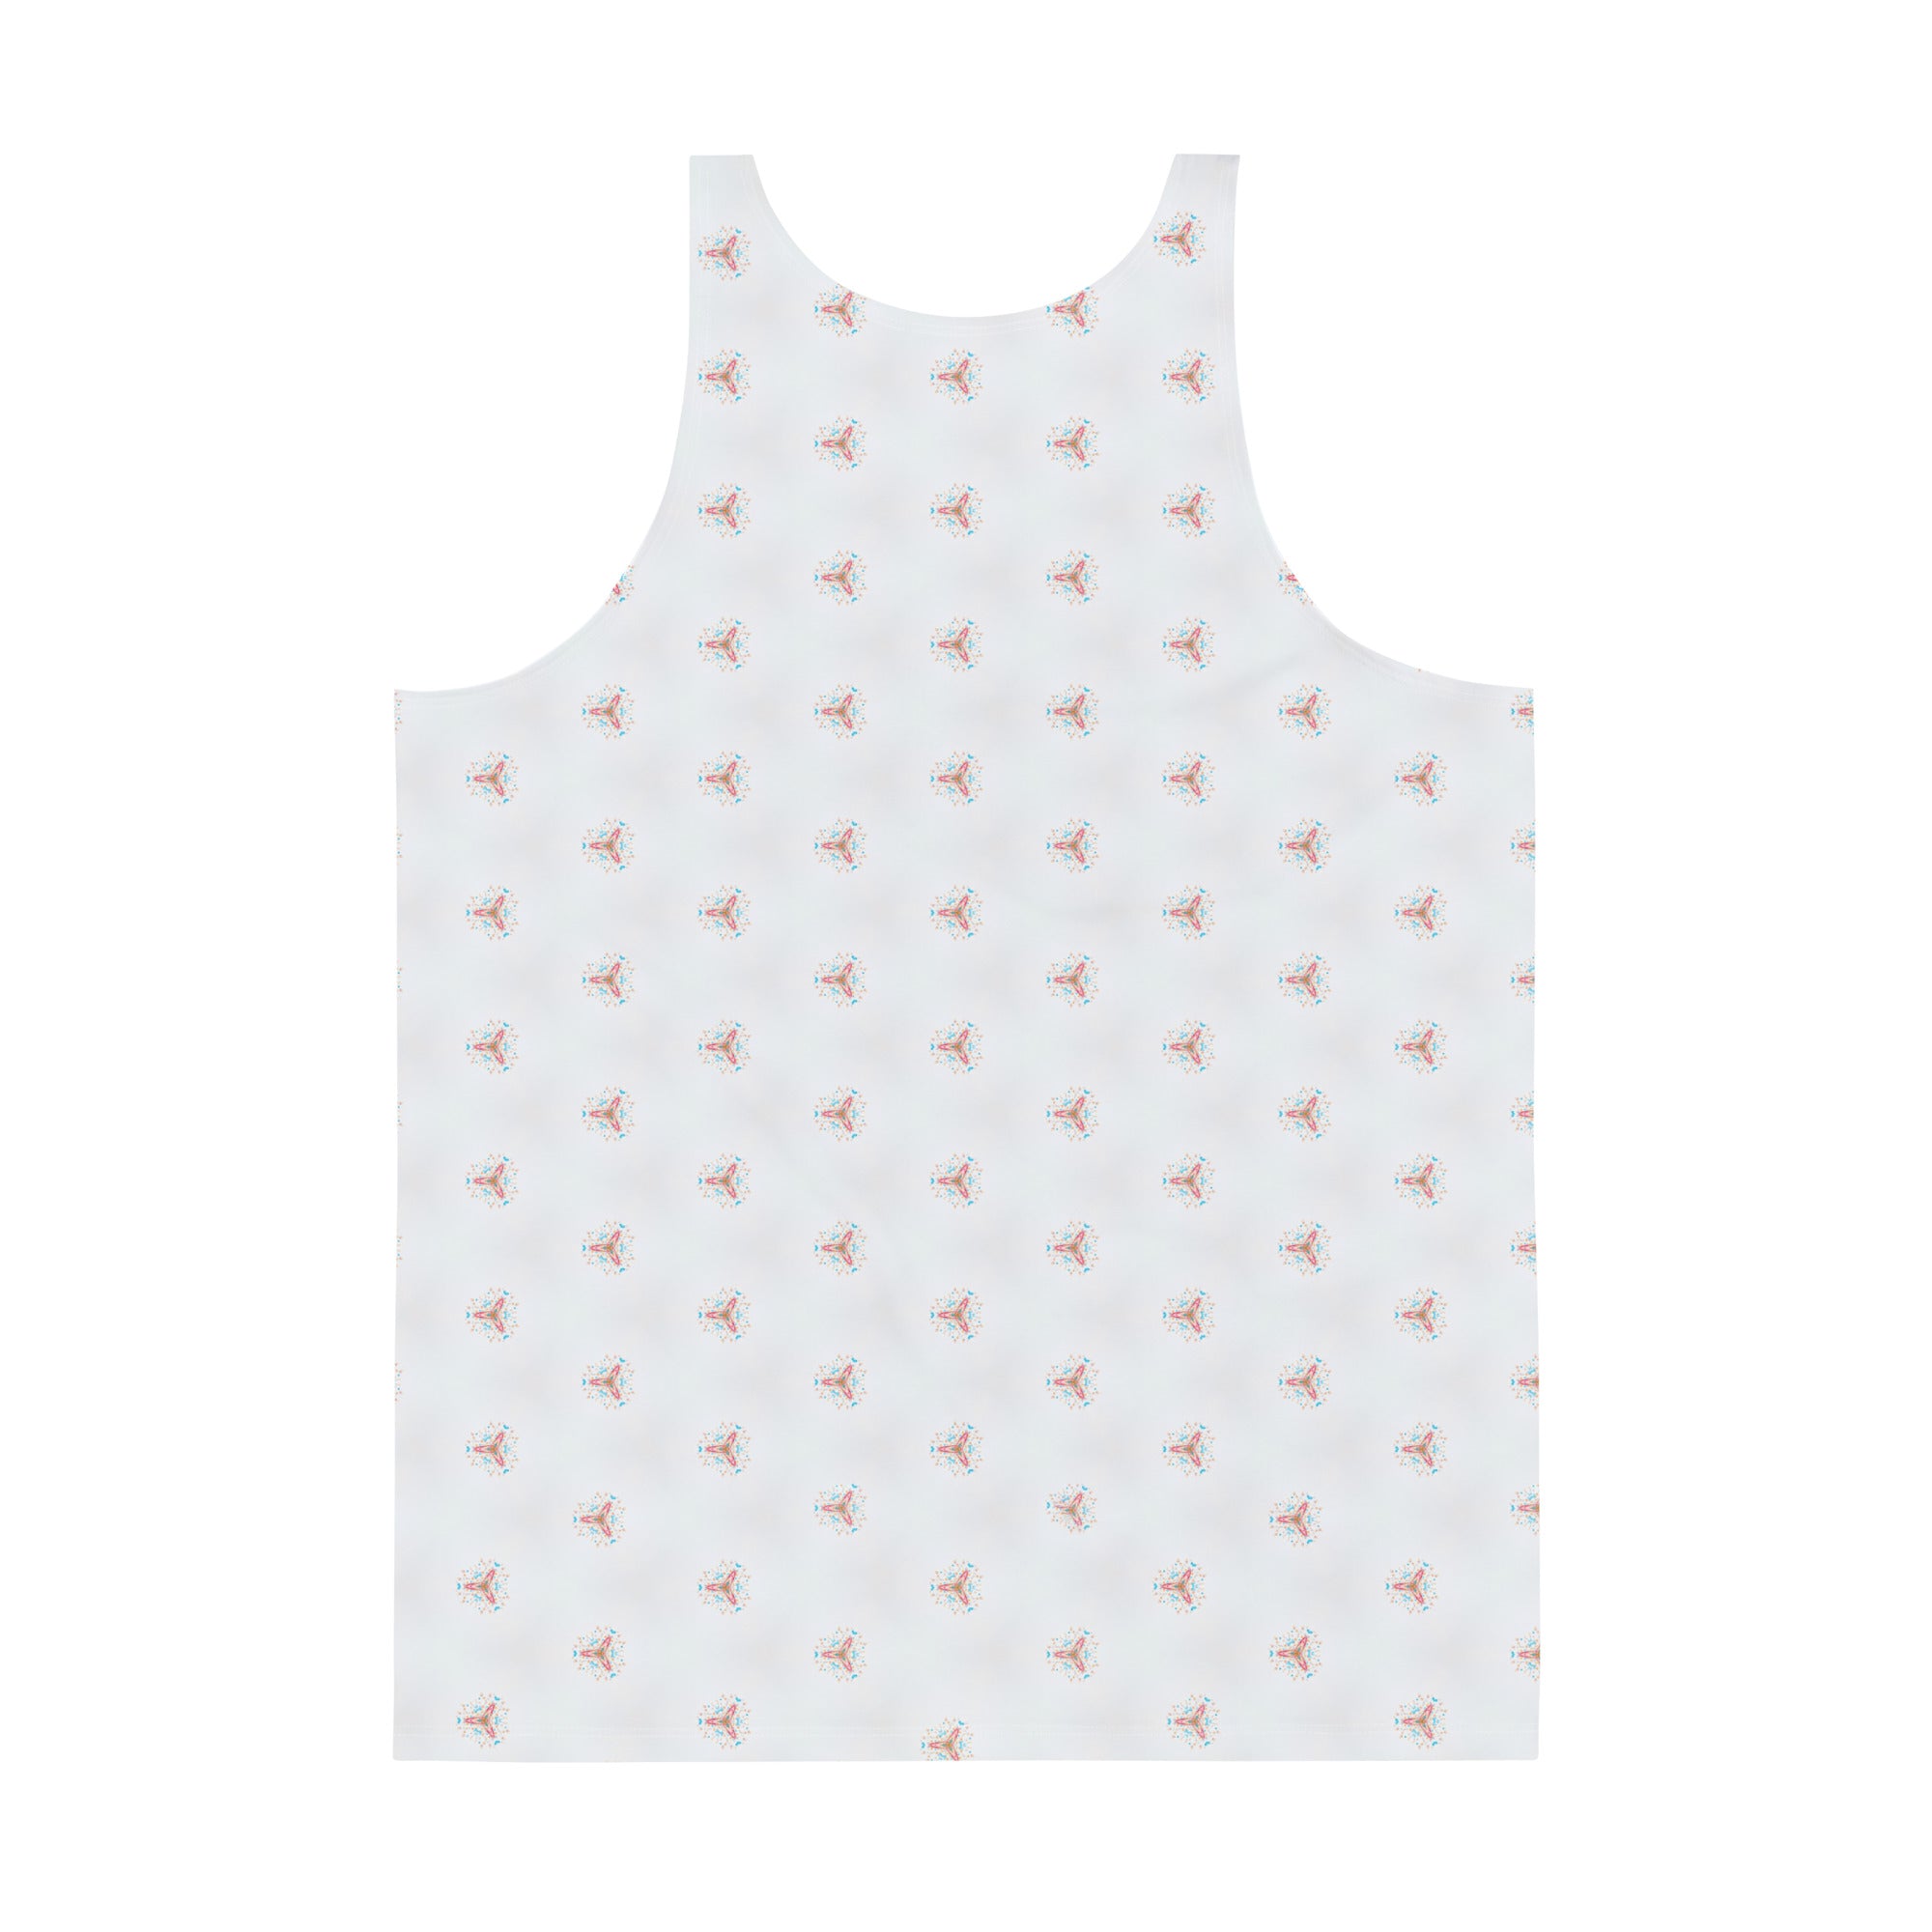 Men's tank top with origami crane pattern.